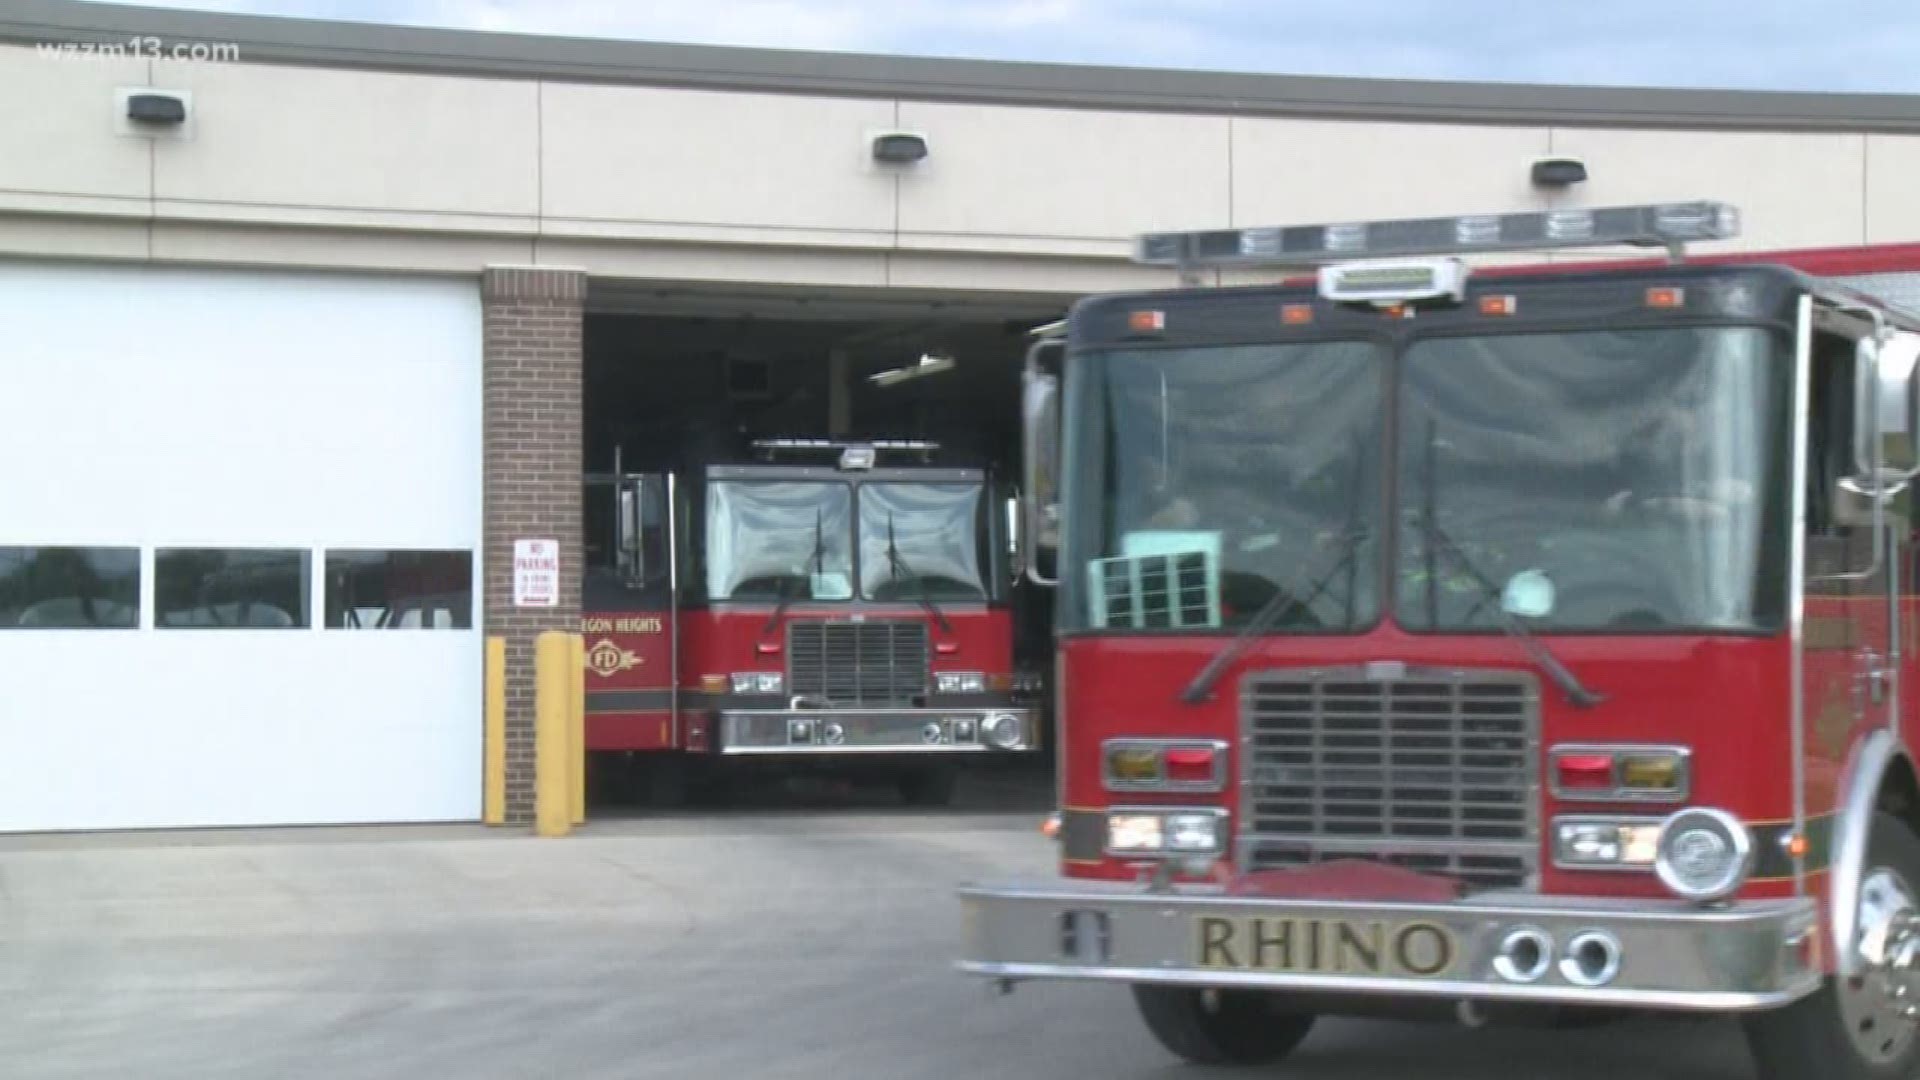 Muskegon Heights approves fire protection proposal